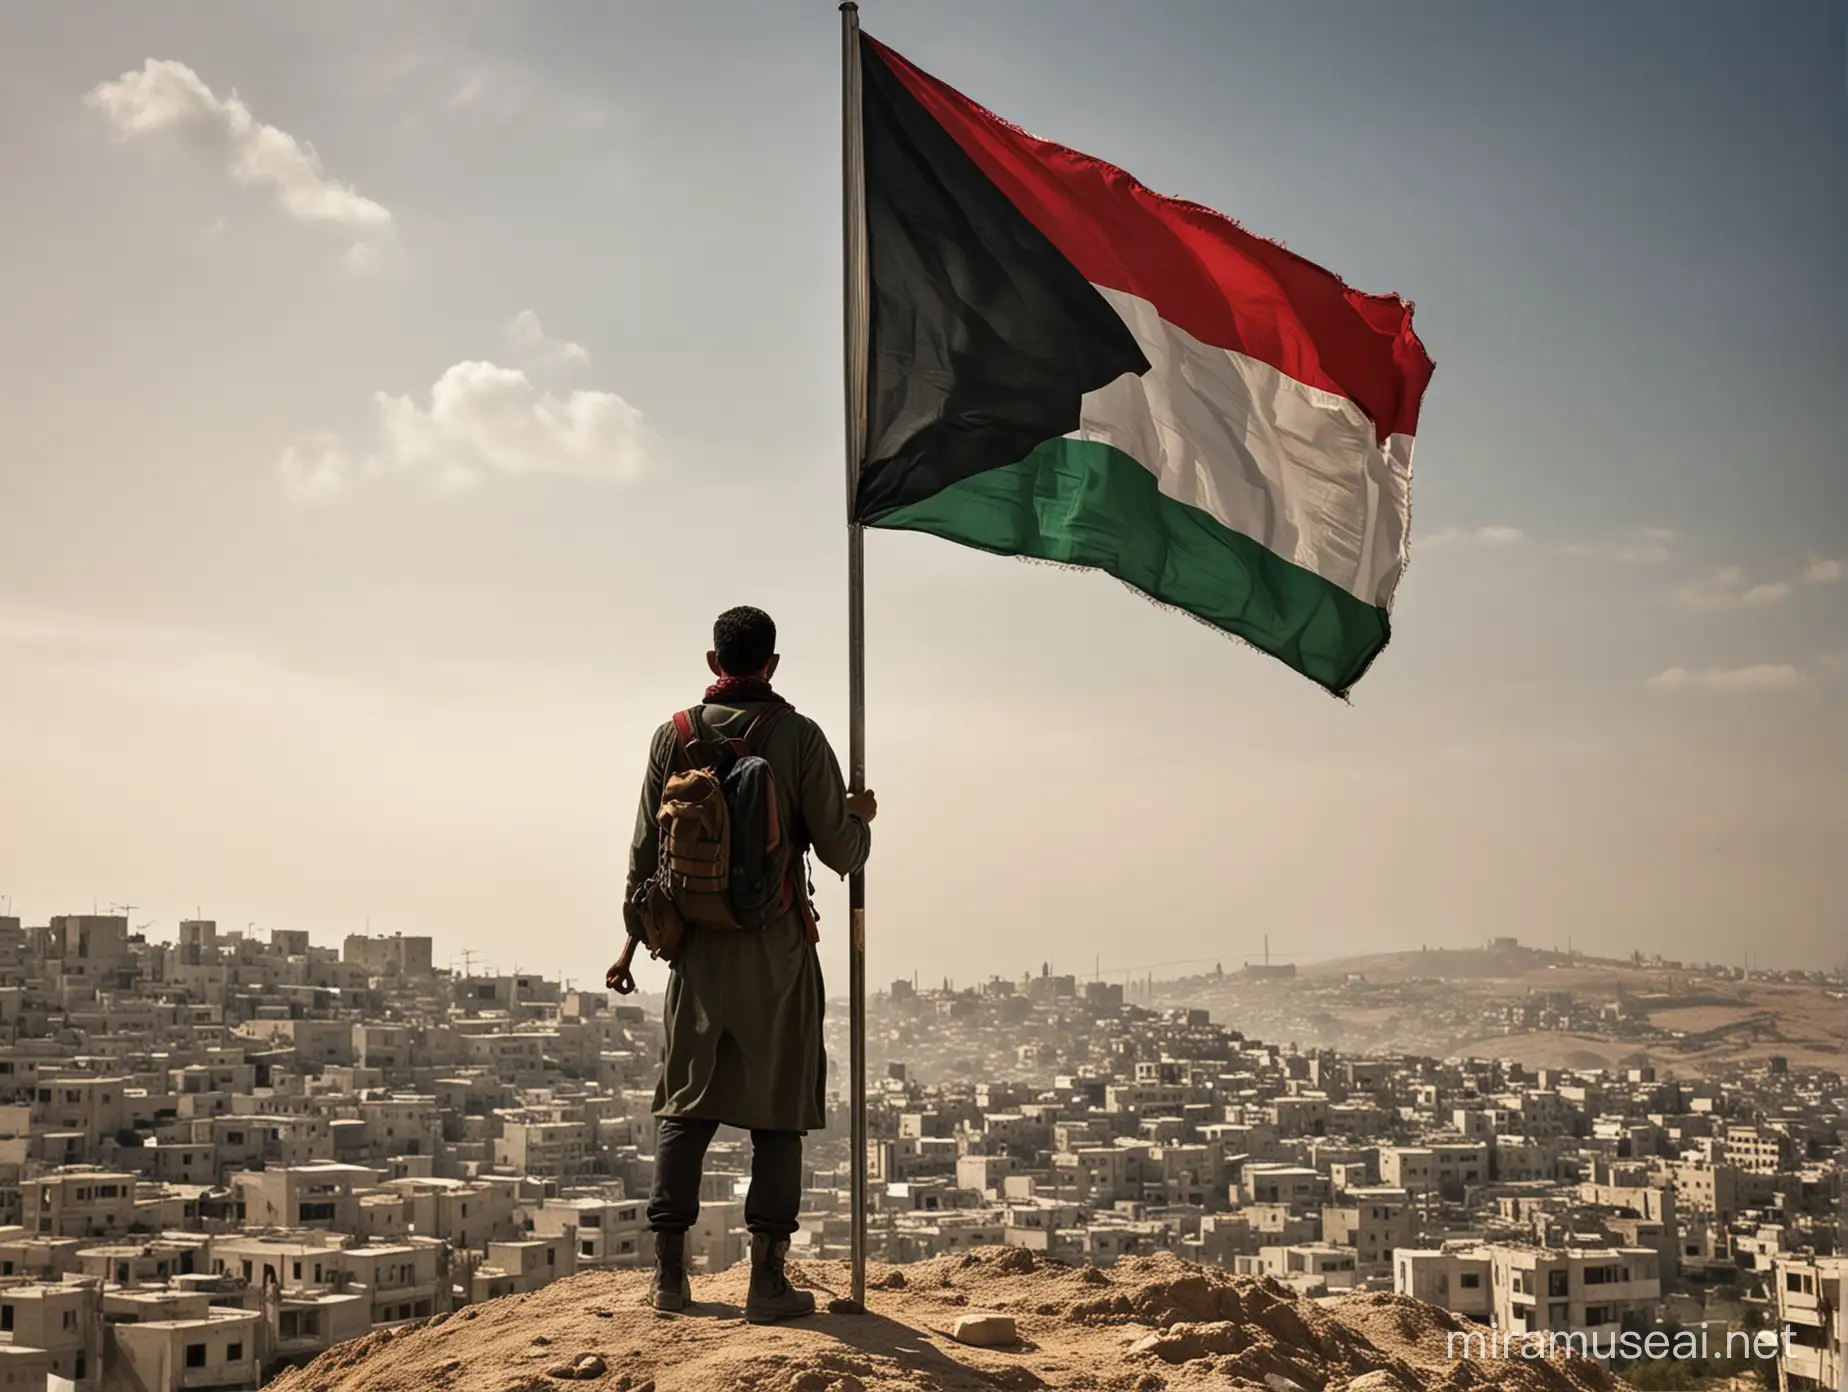 Palestinian Solidarity Determined Figure and Flag Amidst Scenic Backdrop